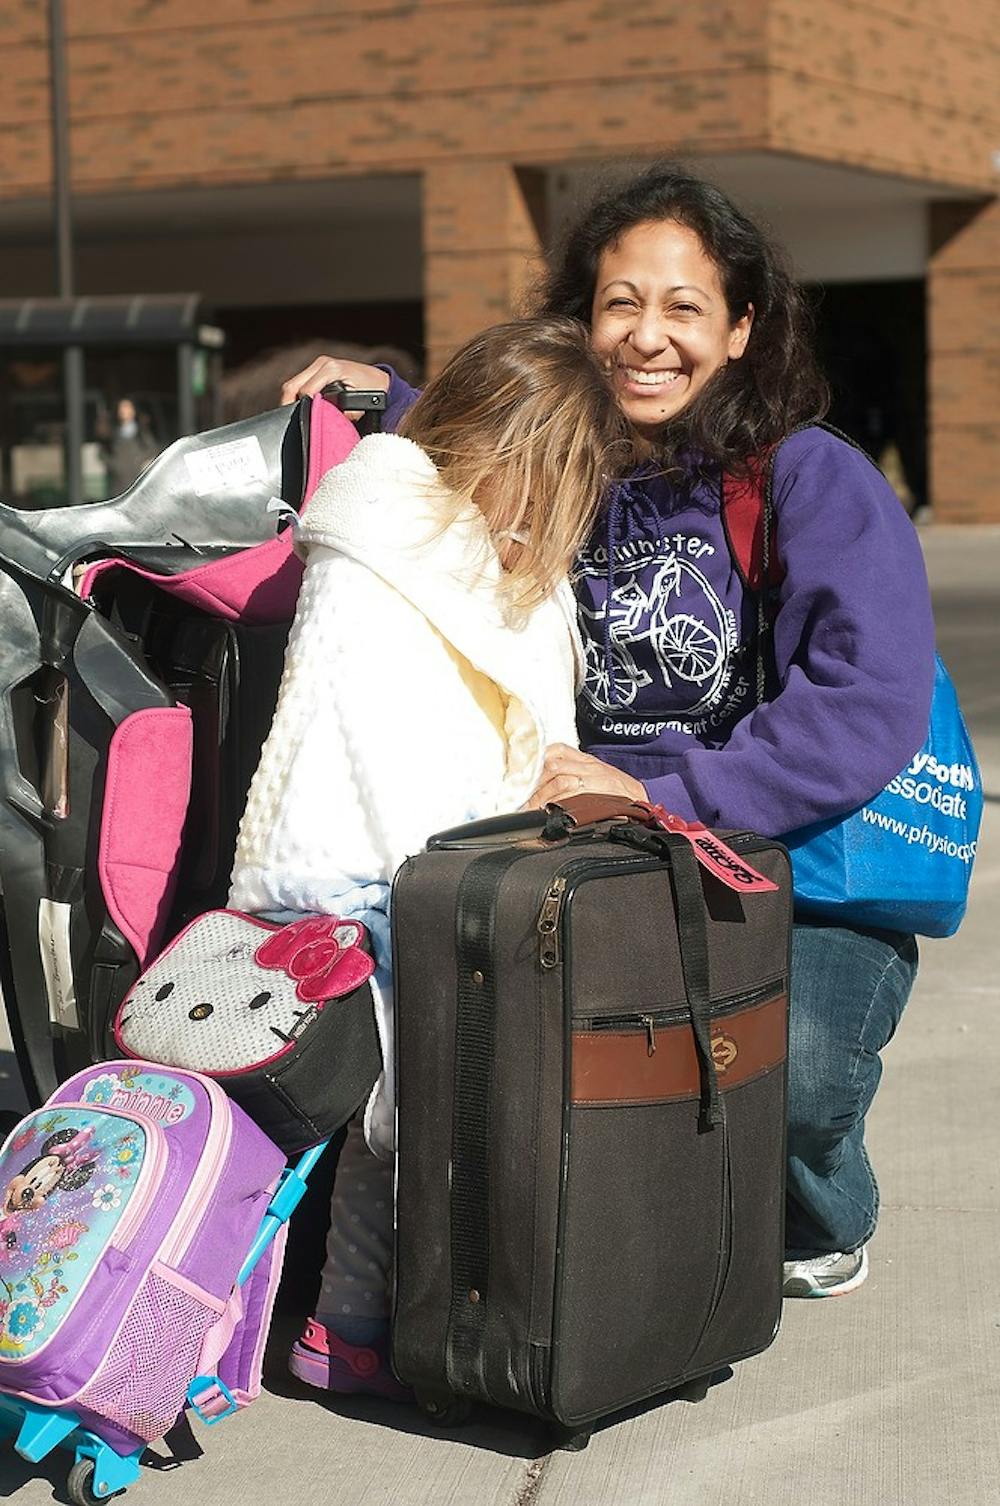 <p>Lansing residents Shannon Branstner and her daughter Isla, 4, arrive in East Lansing March 24, 2015, on the corner of M.A.C. Ave. The two traveled to Texas for ten days to help Branstner's elderly parents move. Kennedy Thatch/The State News</p>